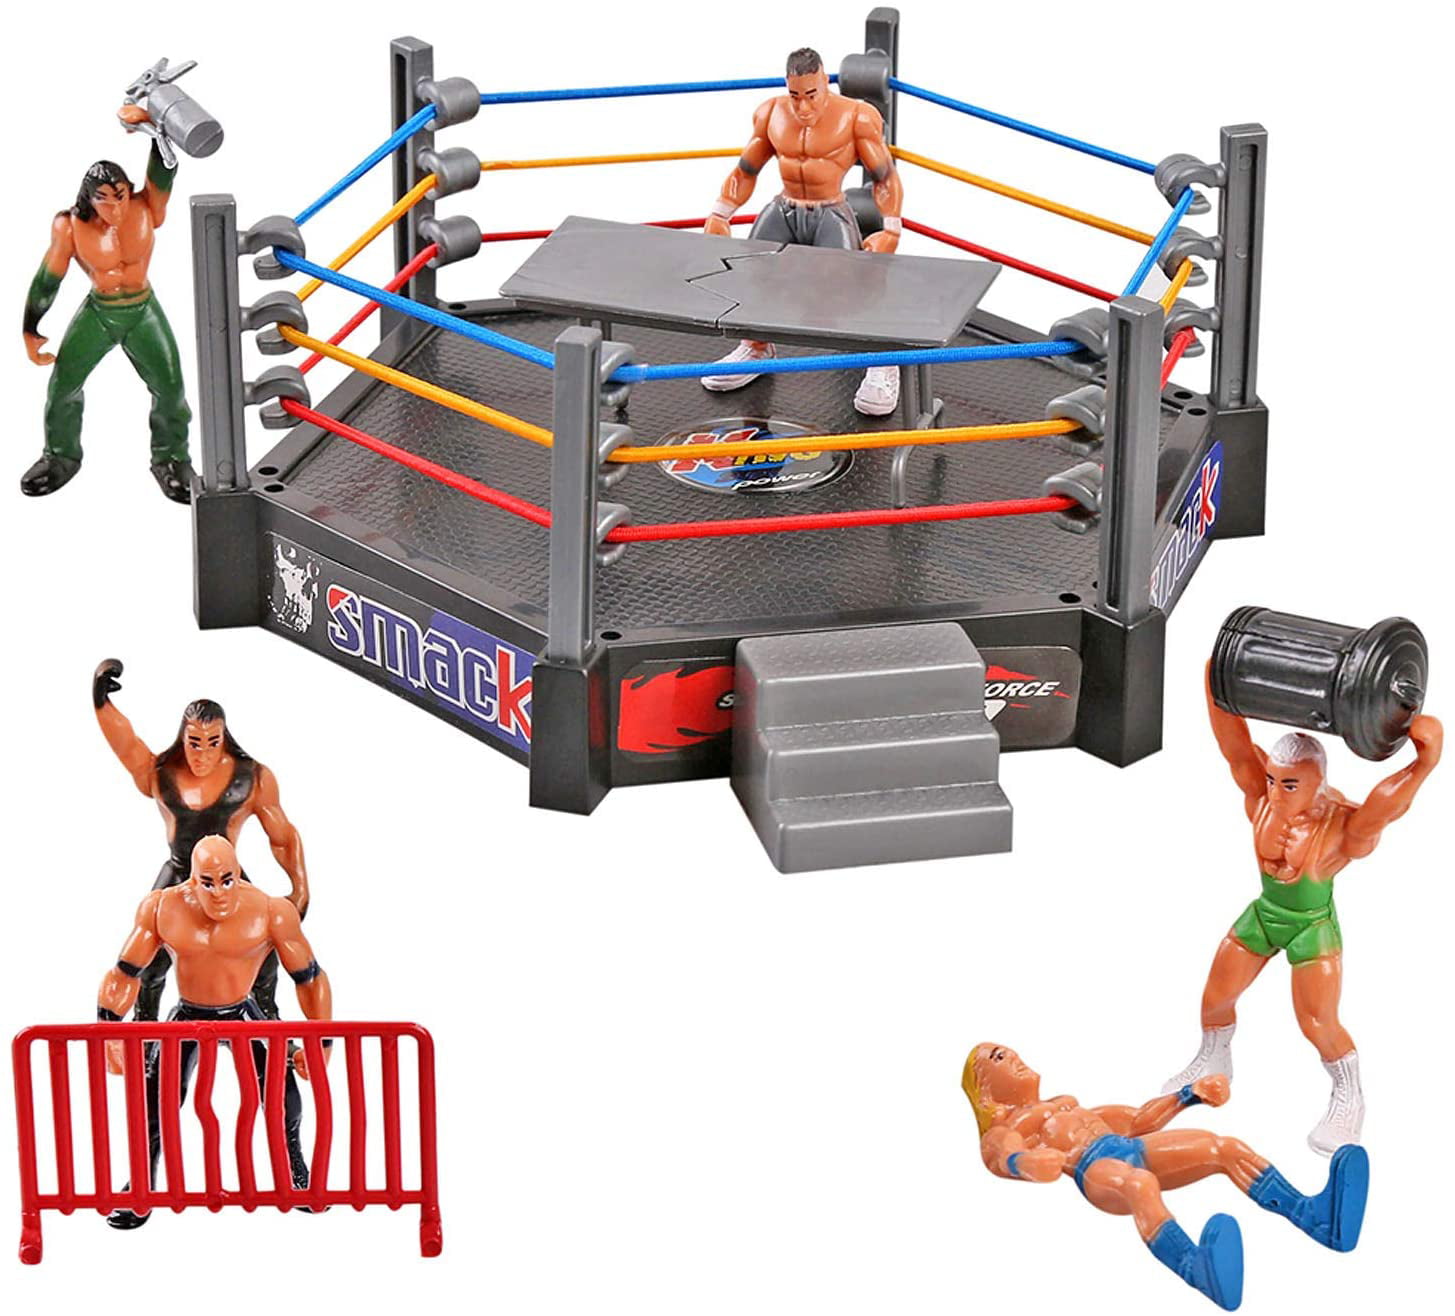 URBAN KIT Children's Wrestling Stage Ring With 12 Figures Mini